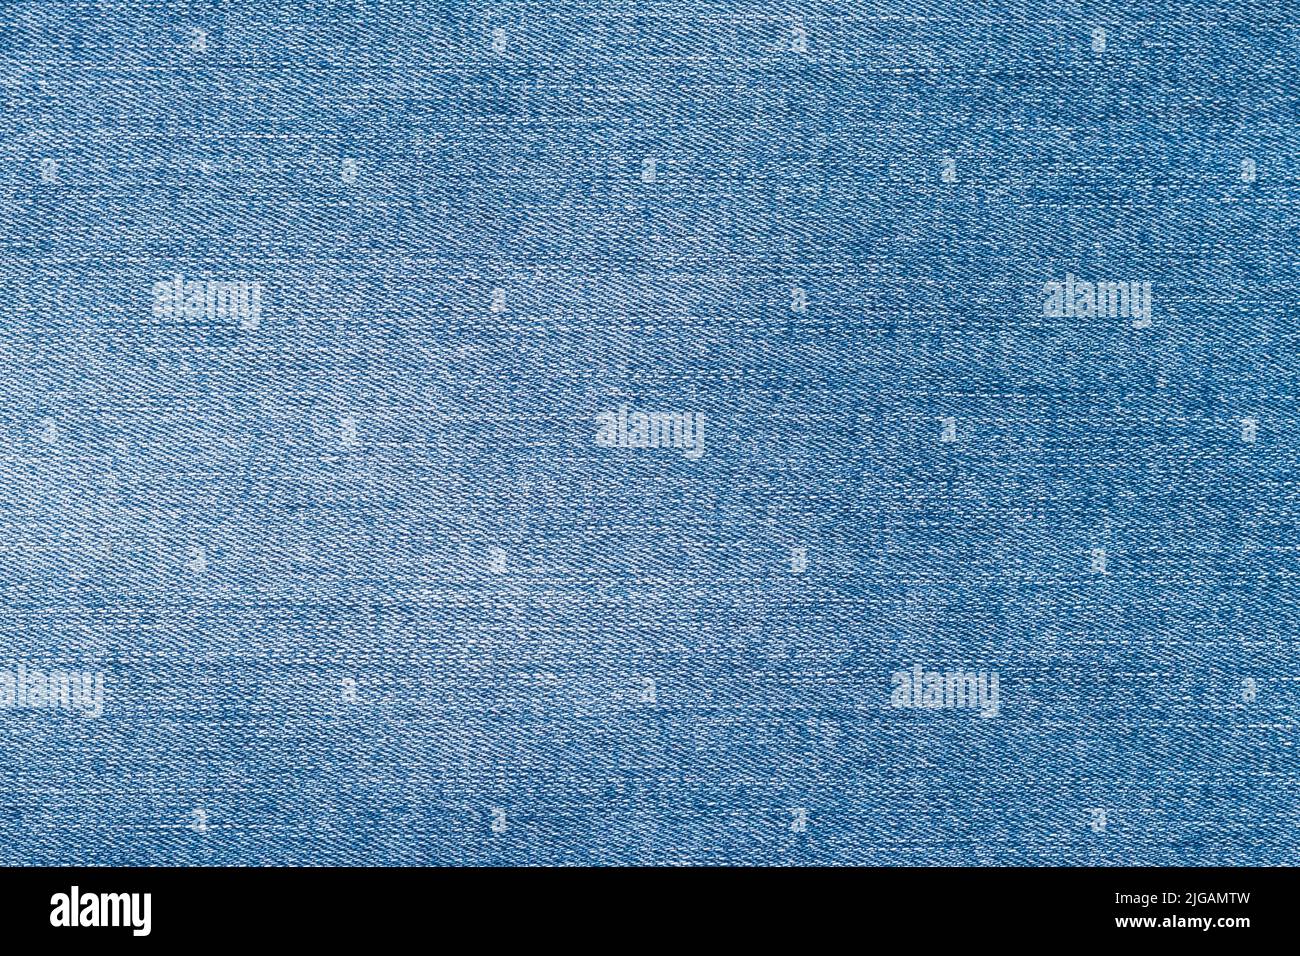 Texture denim background, close up jeans, details line pattern, fabric surface, blue cloth wallpaper, rough material Stock Photo